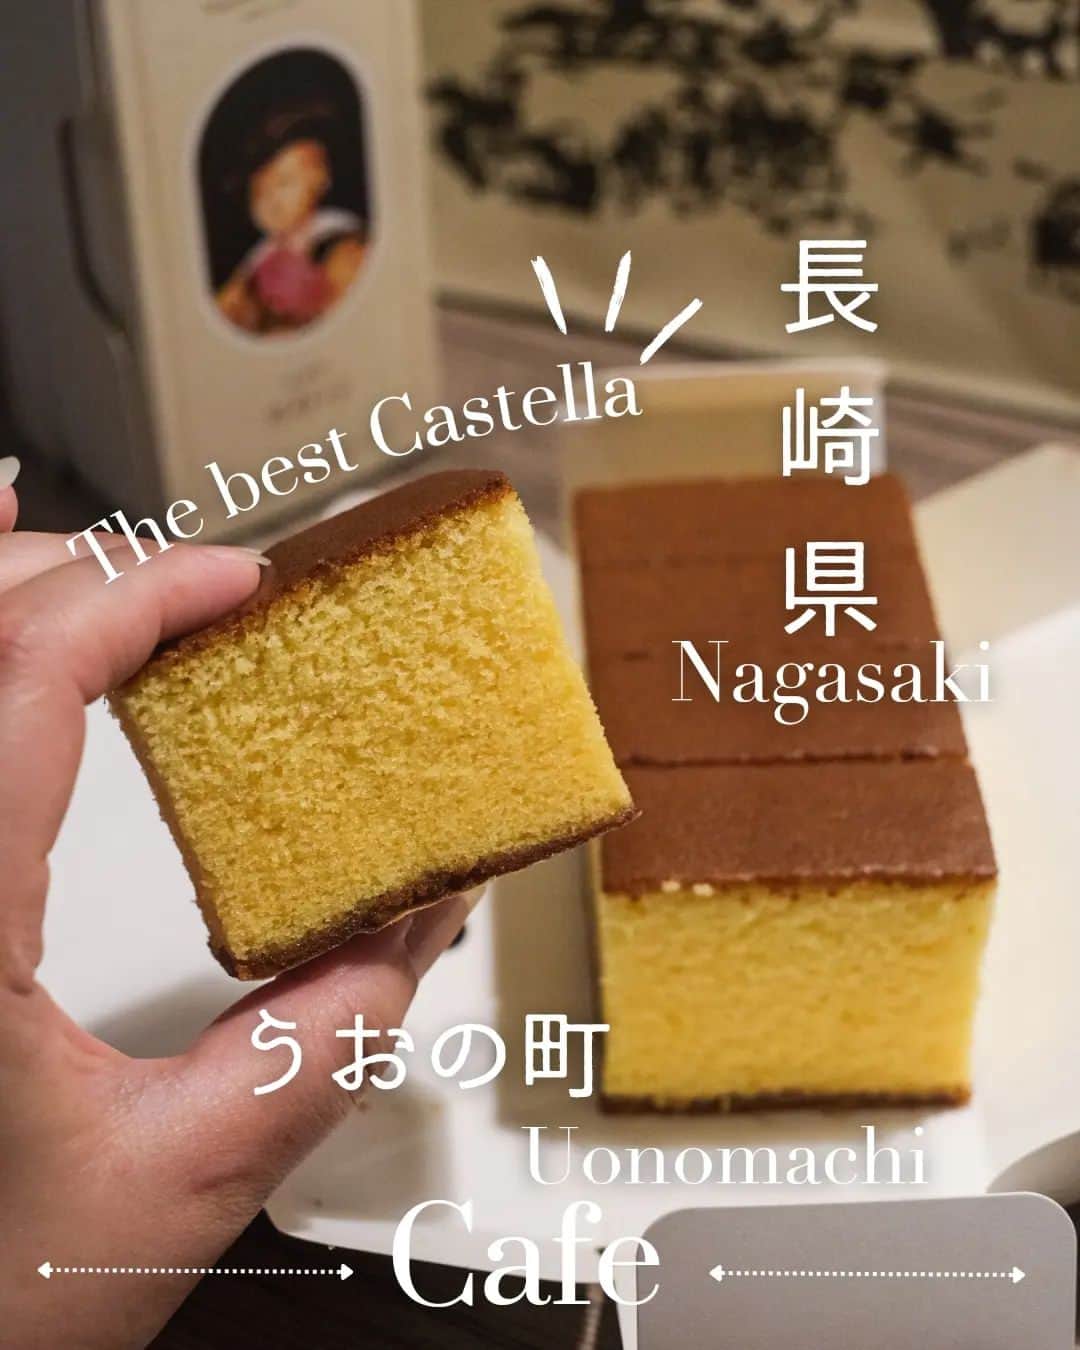 Erinaのインスタグラム：「Seriously I had the best castella in my life at @shooken_castella !  Their castella is an absolute treat, offering a delightful combination of softness, moistness, and just the right amount of sweetness. The addition of sugar crystals at the bottom adds a playful and satisfying crunch to every bite🥹🥺🥺  Even though we couldn't make it to the café, we were fortunate enough to get a packet, and it was devoured so quickly that we had to get more the very next day, including some as gifts🎁   I highly recommend this place—it's a must-visit destination, and I can't wait to experience it firsthand when I return!  ____________________________ @shooken_castella  Address: 3-19 Uonomachi, Nagasaki, 850-0874, Japan  ____________________________」